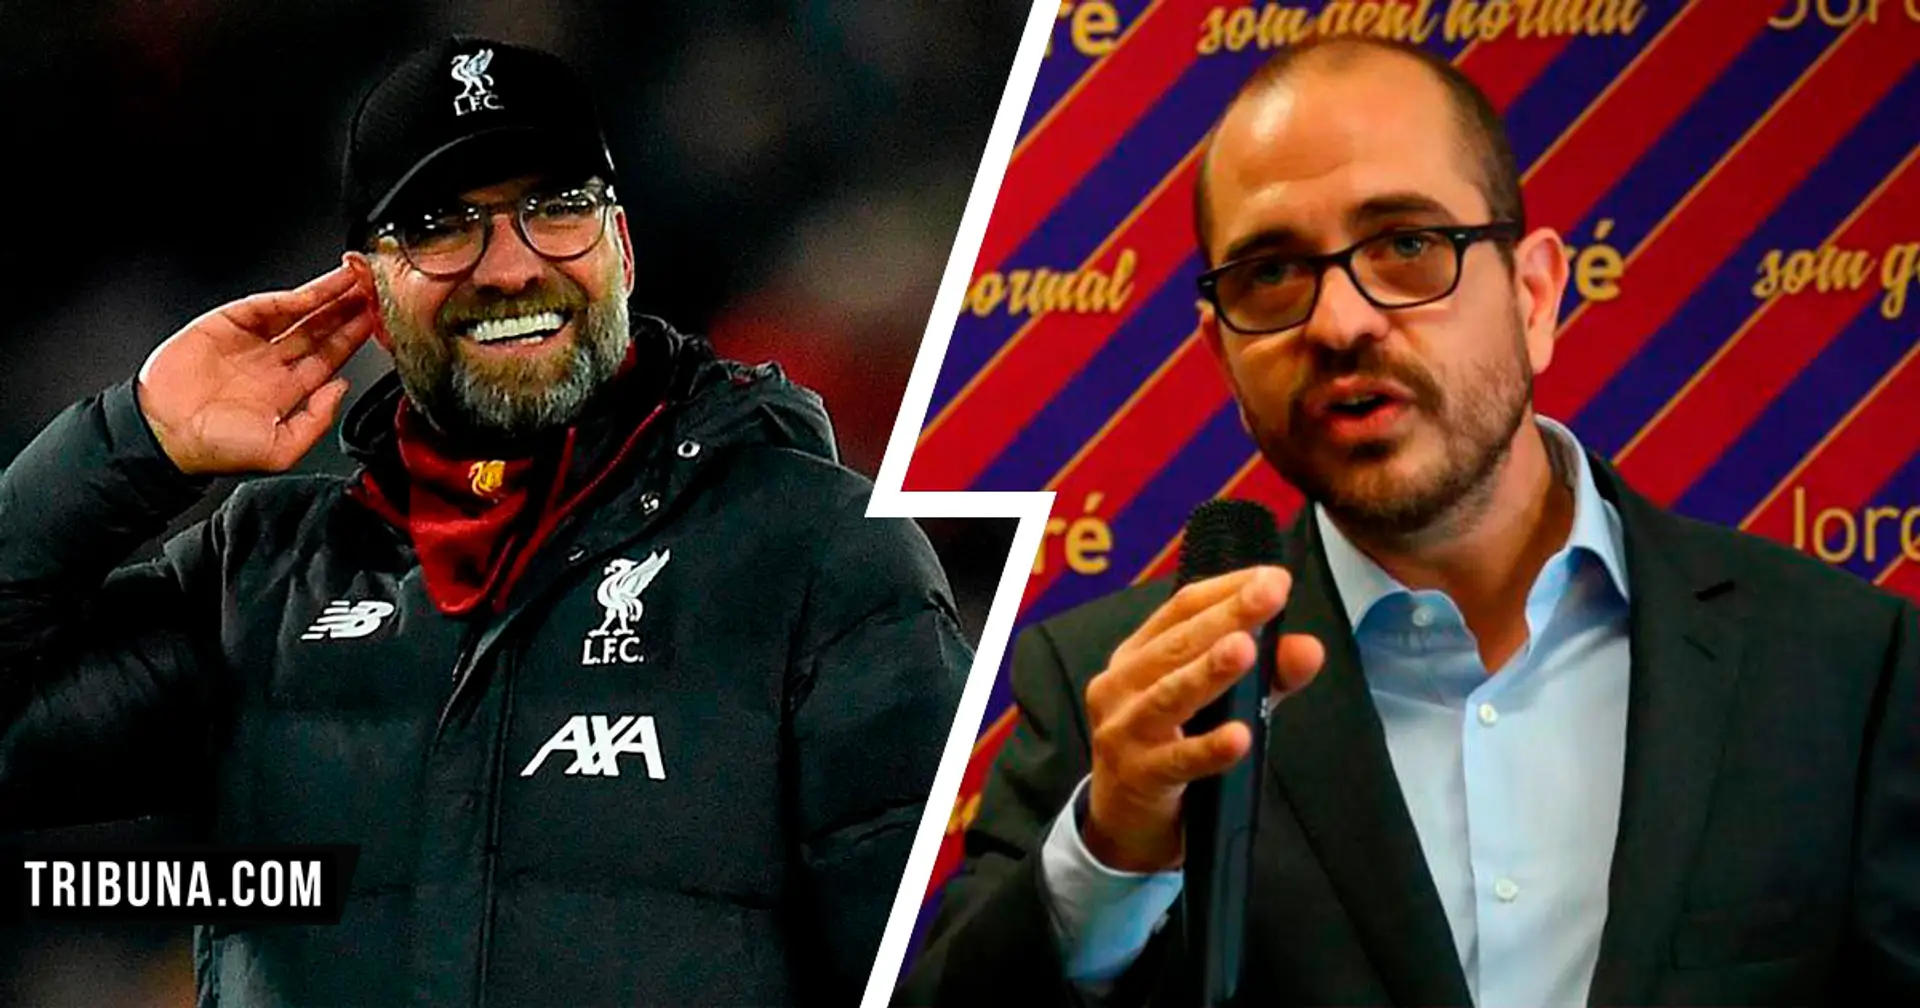 Barcelona presidential candidate Jordi Farre: We already started talks with Jurgen Klopp to become club's next manager